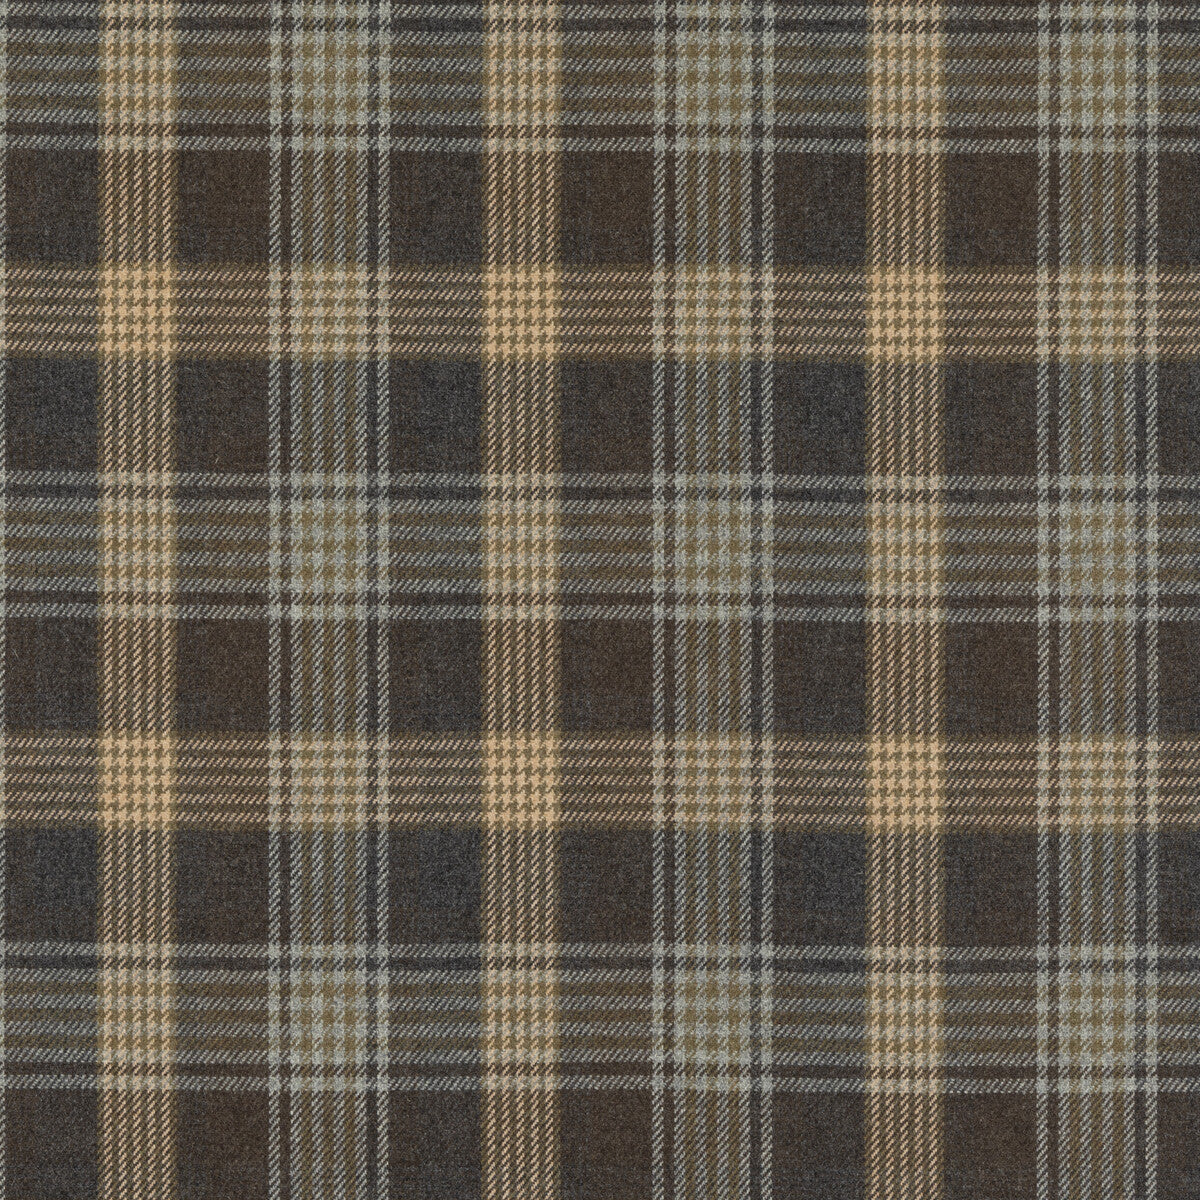 Braemar fabric in woodsmoke color - pattern FD803.A15.0 - by Mulberry in the Mulberry Wools IV collection